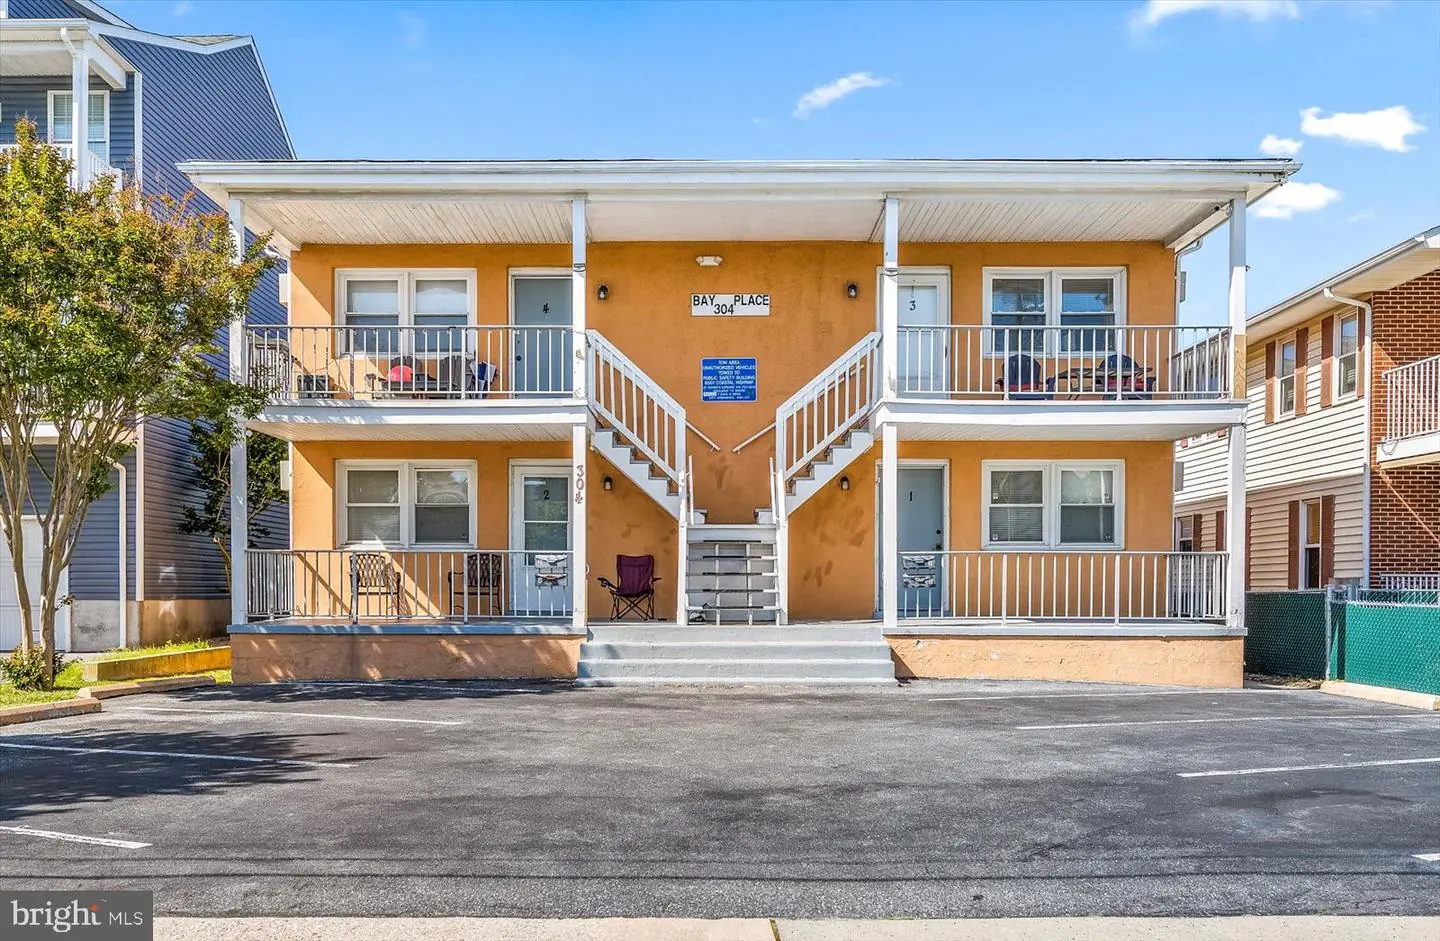 MDWO2014494-802400069656-2023-06-08-12-15-04 304 26th St | Ocean City, MD Real Estate For Sale | MLS# Mdwo2014494  - 1st Choice Properties